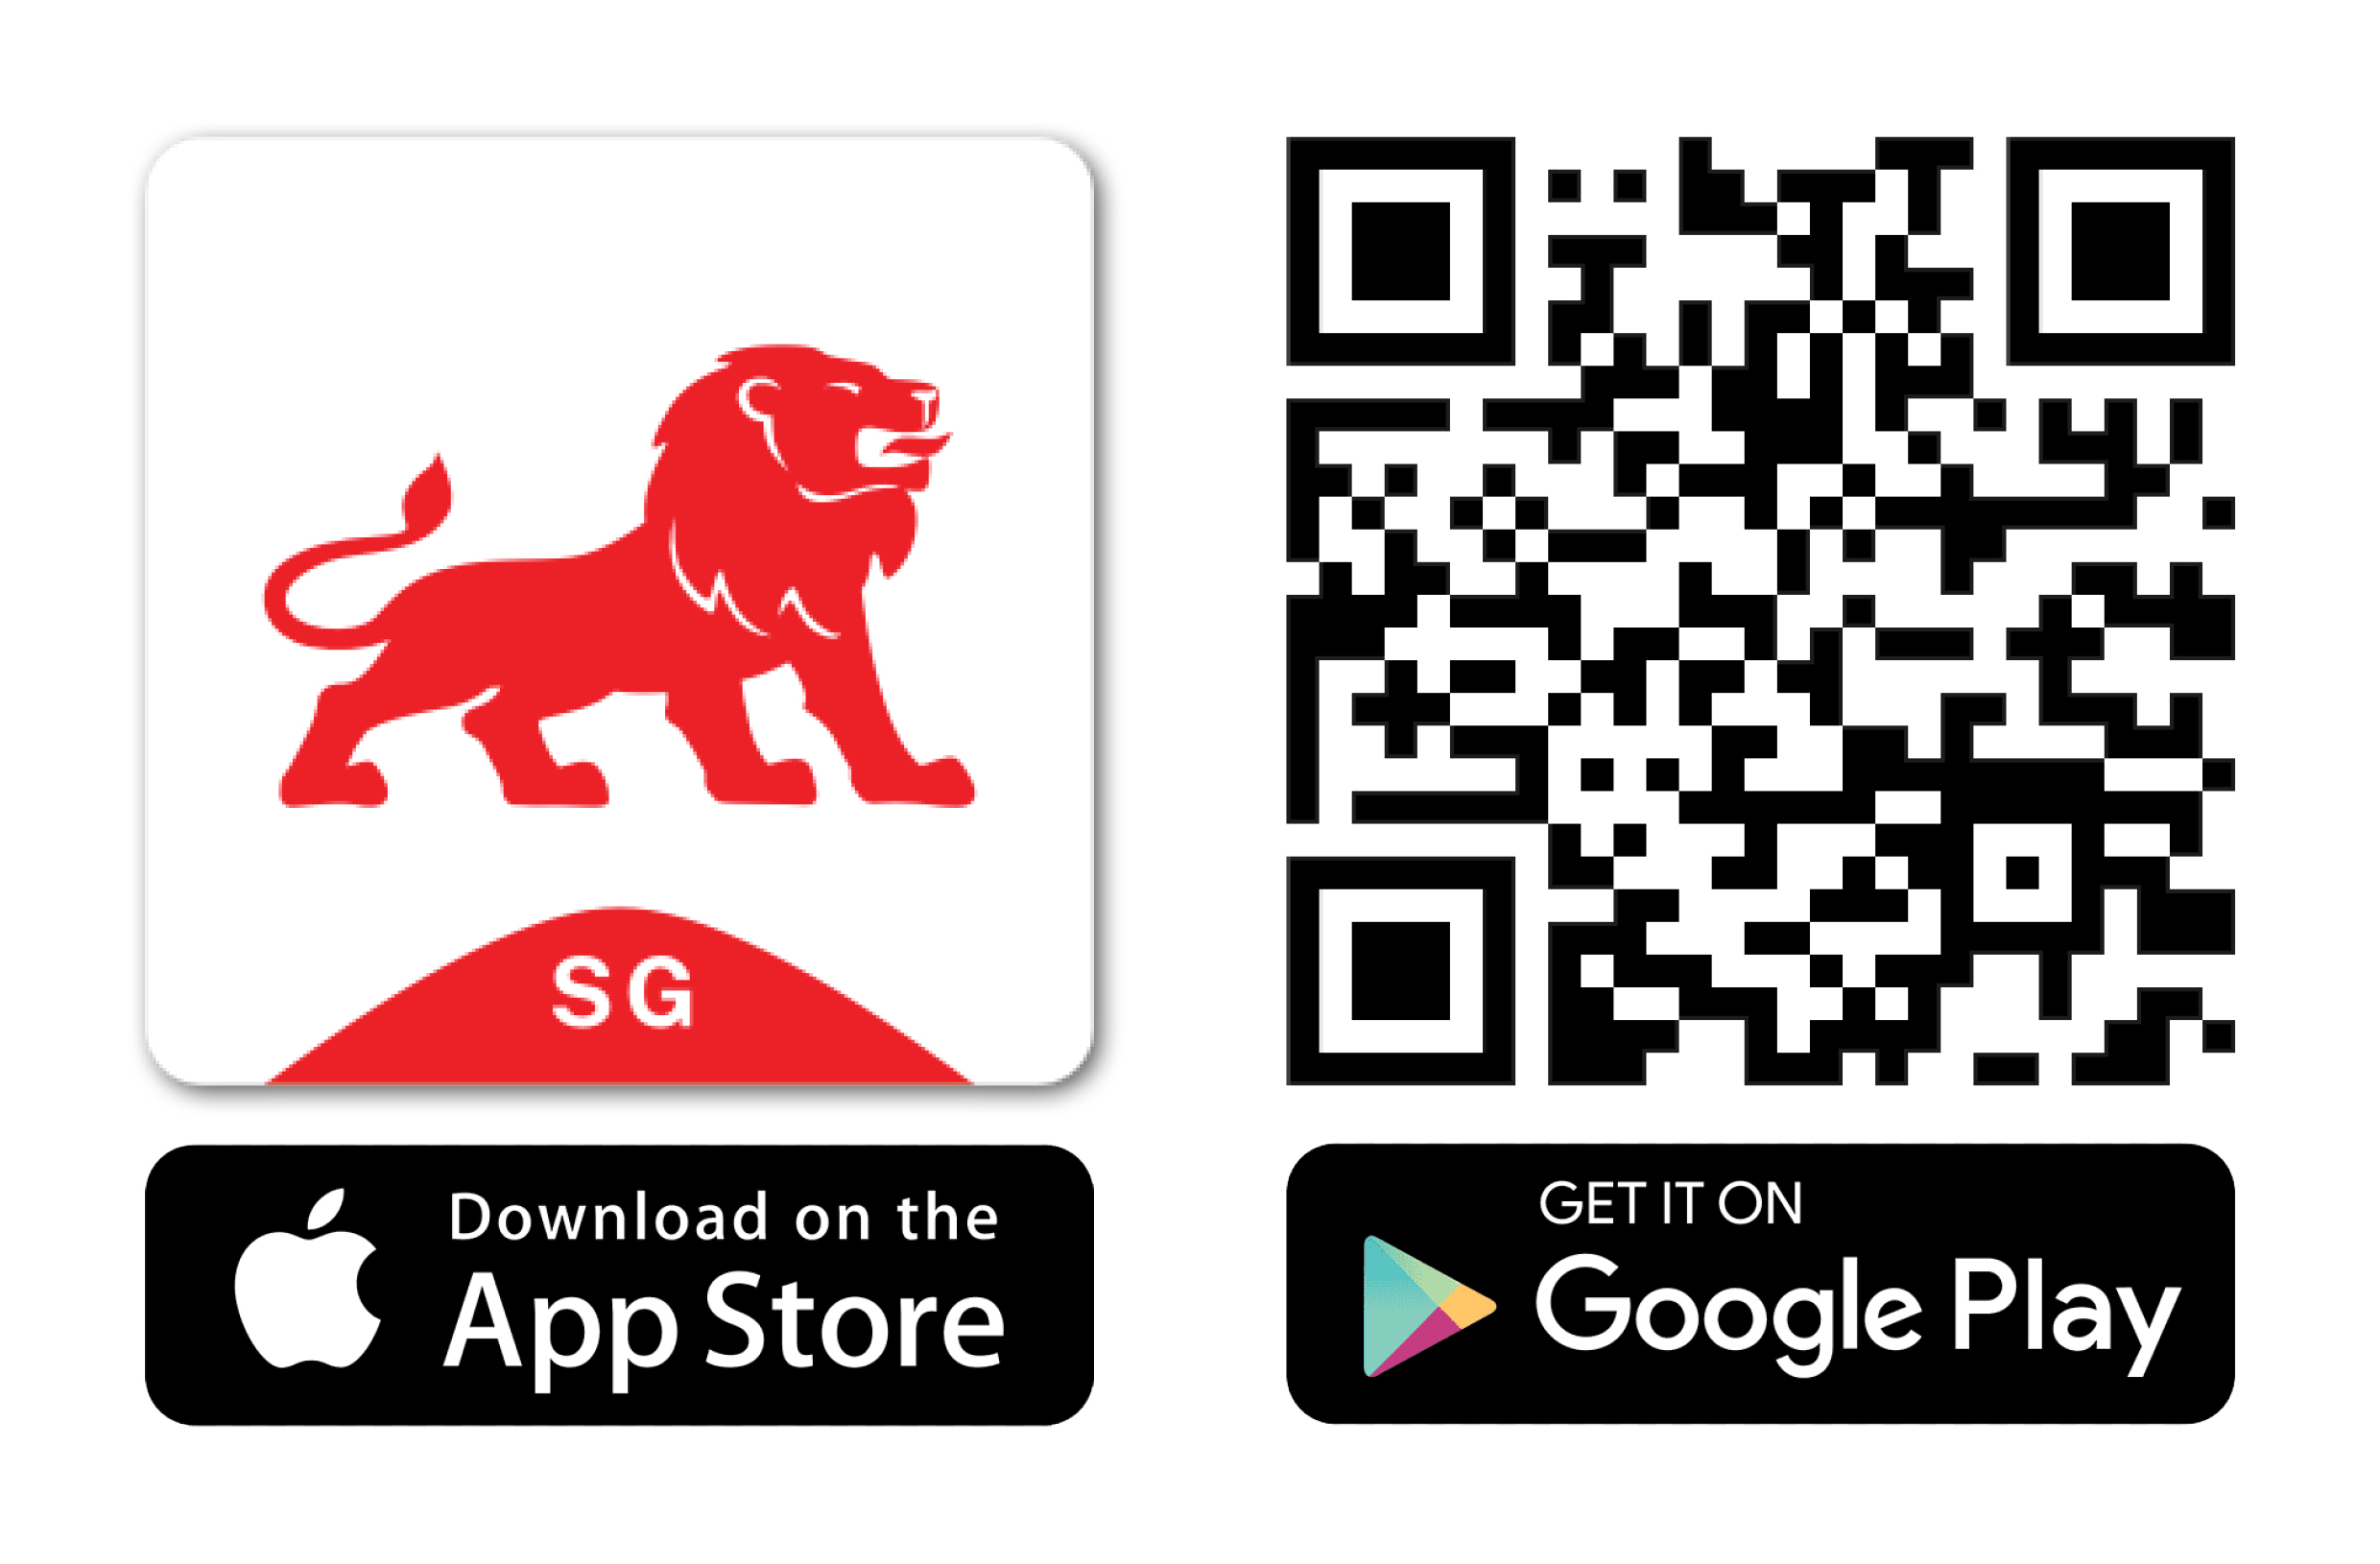 Scan the QR Code to access Great Eastern App today